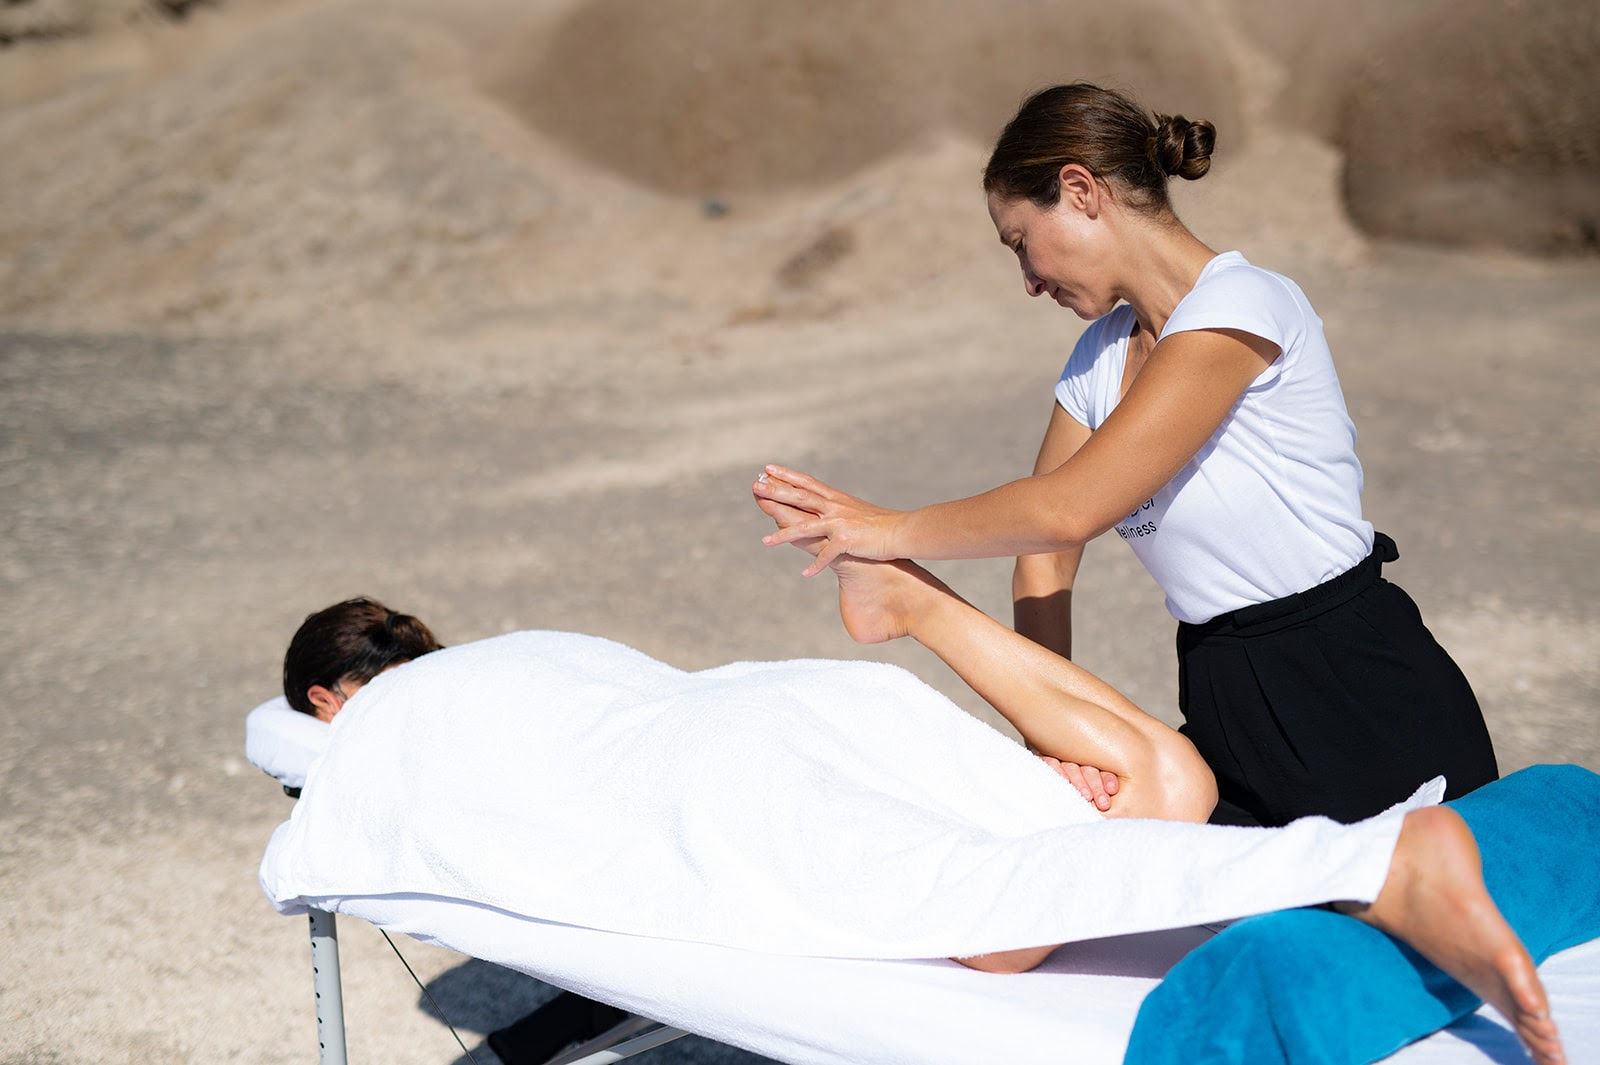 Sport Massage in Santorini - Incorporating Swedish massage techniques, effleurage, petrissage, compression, vibration, stretching, percussion, and trigger point therapy.